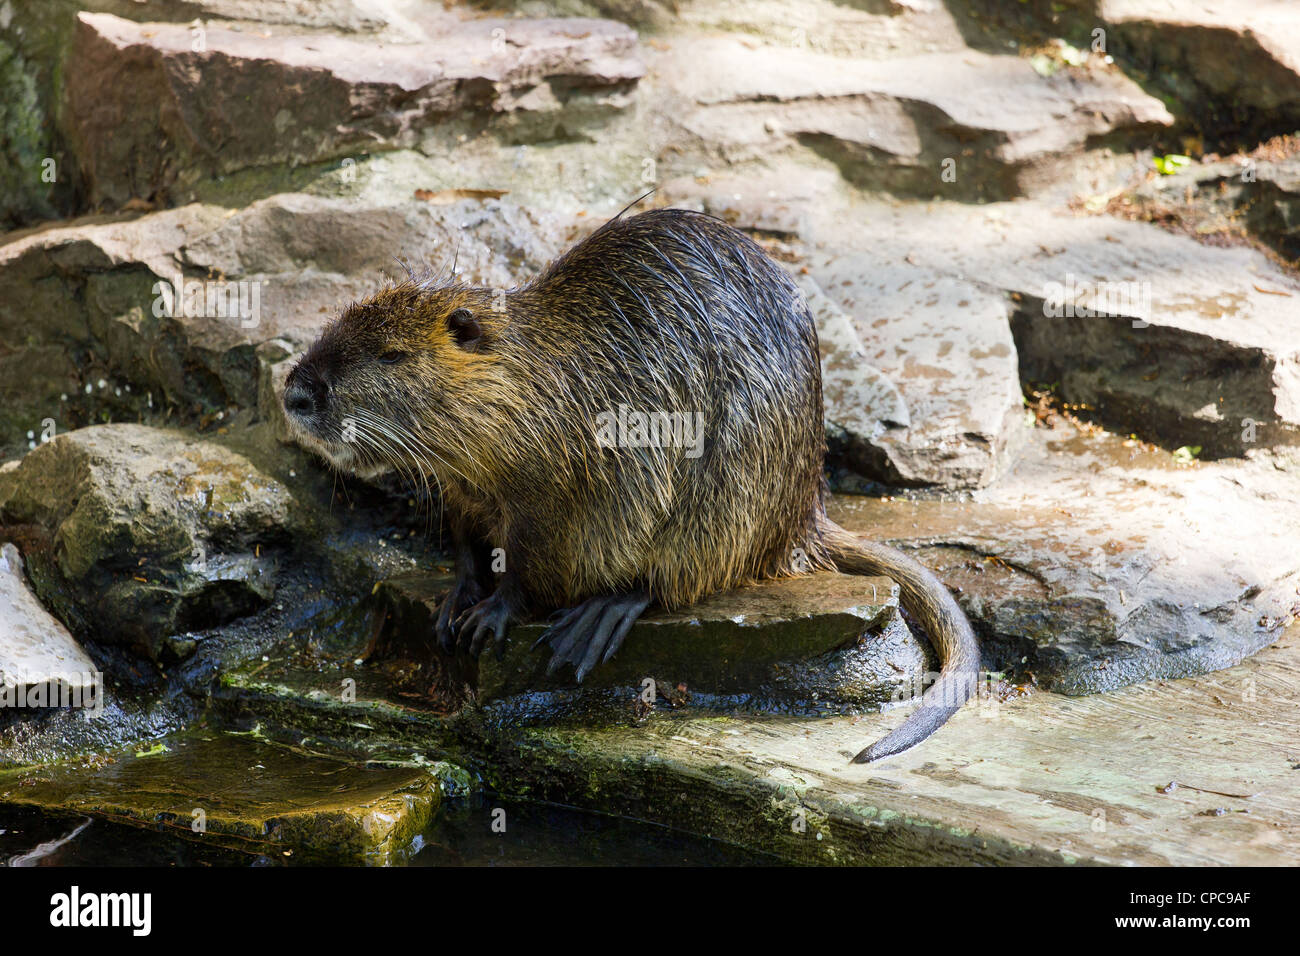 A Capybara sitting on a rock by the water Stock Photo